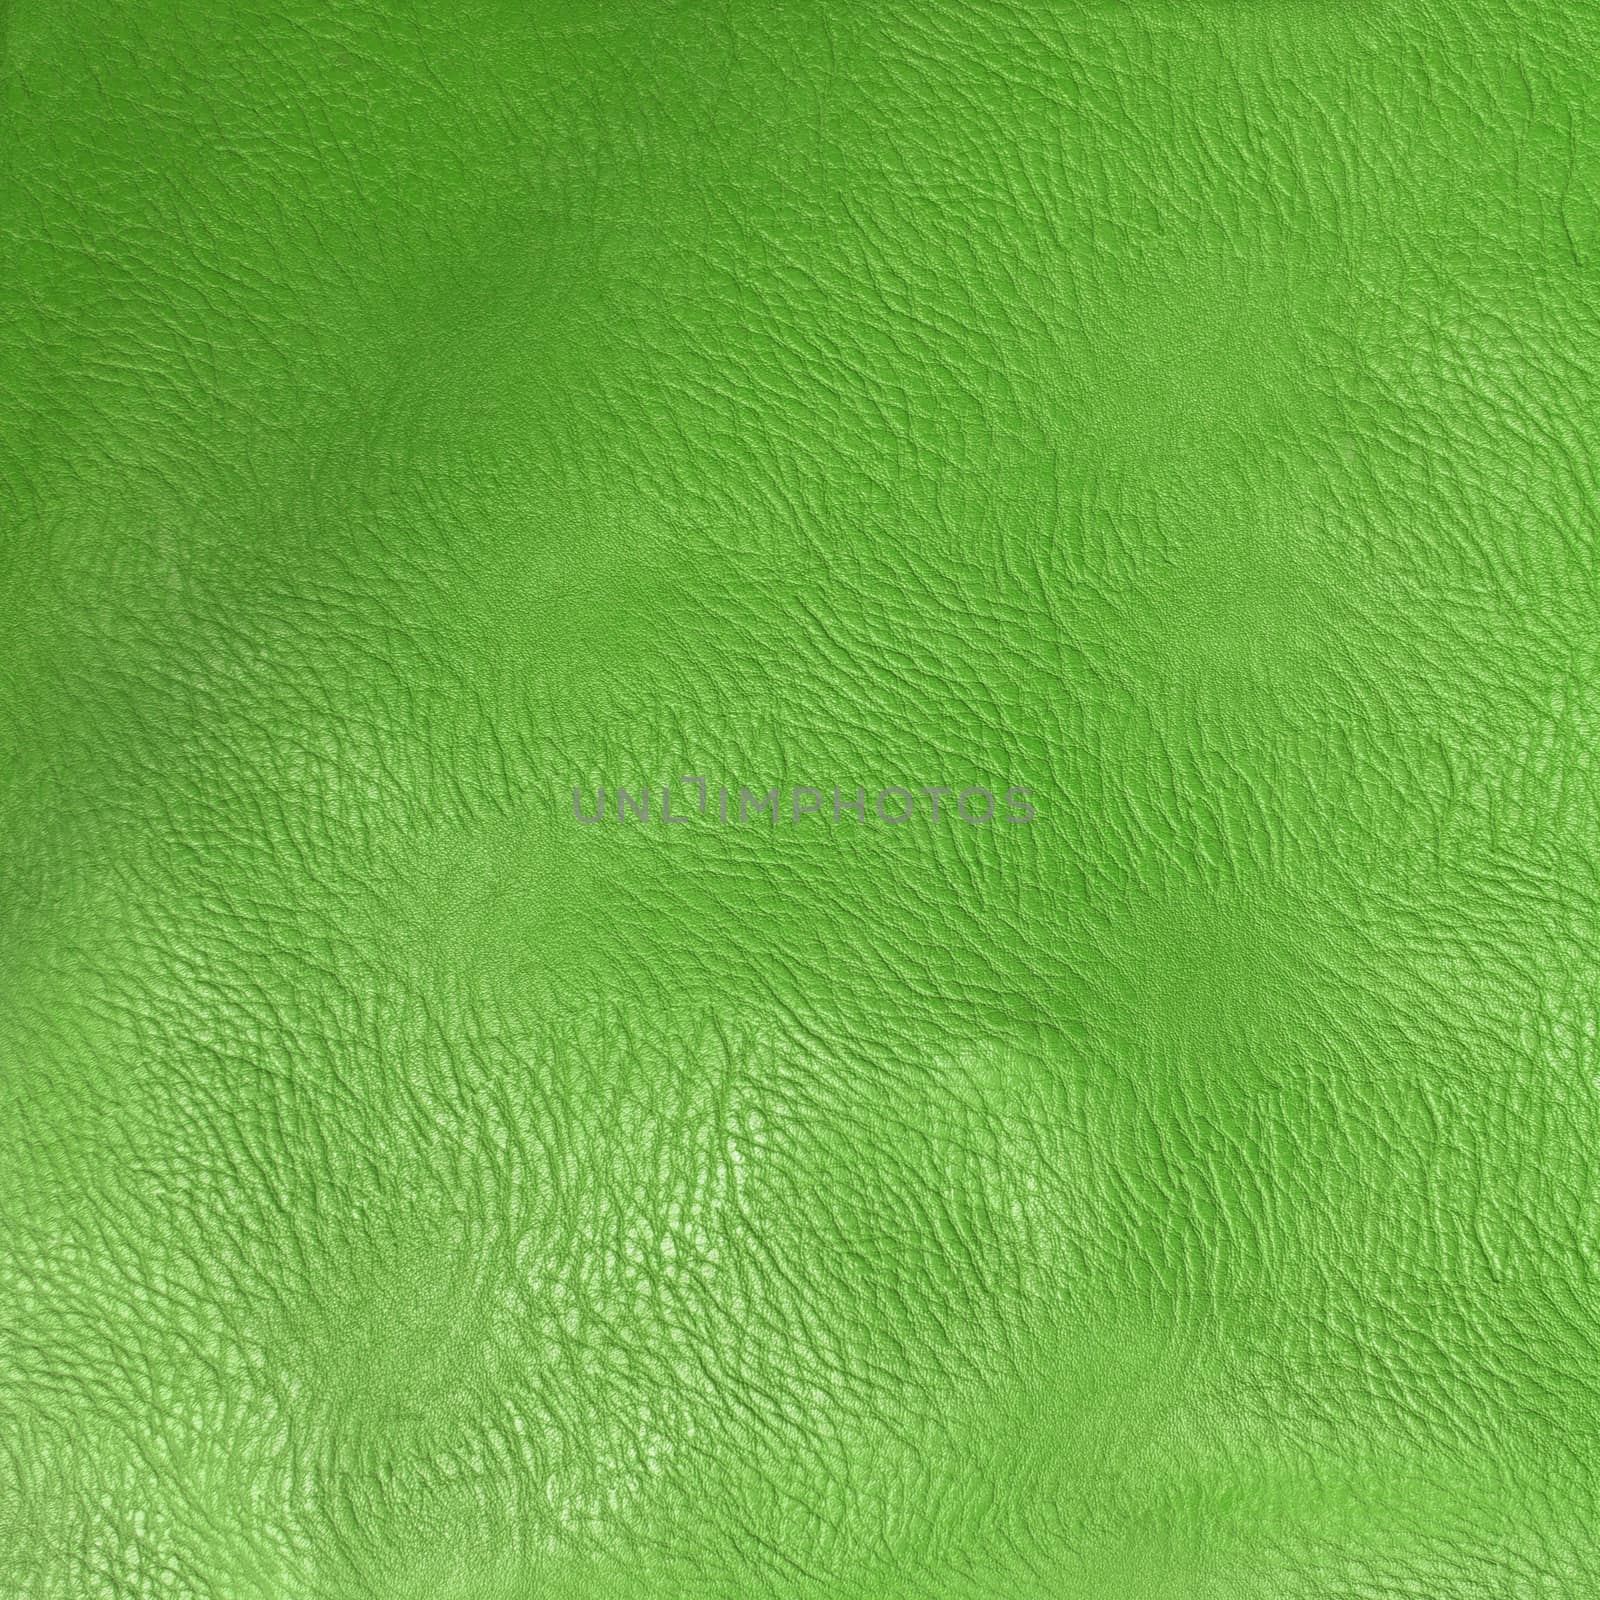 Texture of green leather for background  by wyoosumran